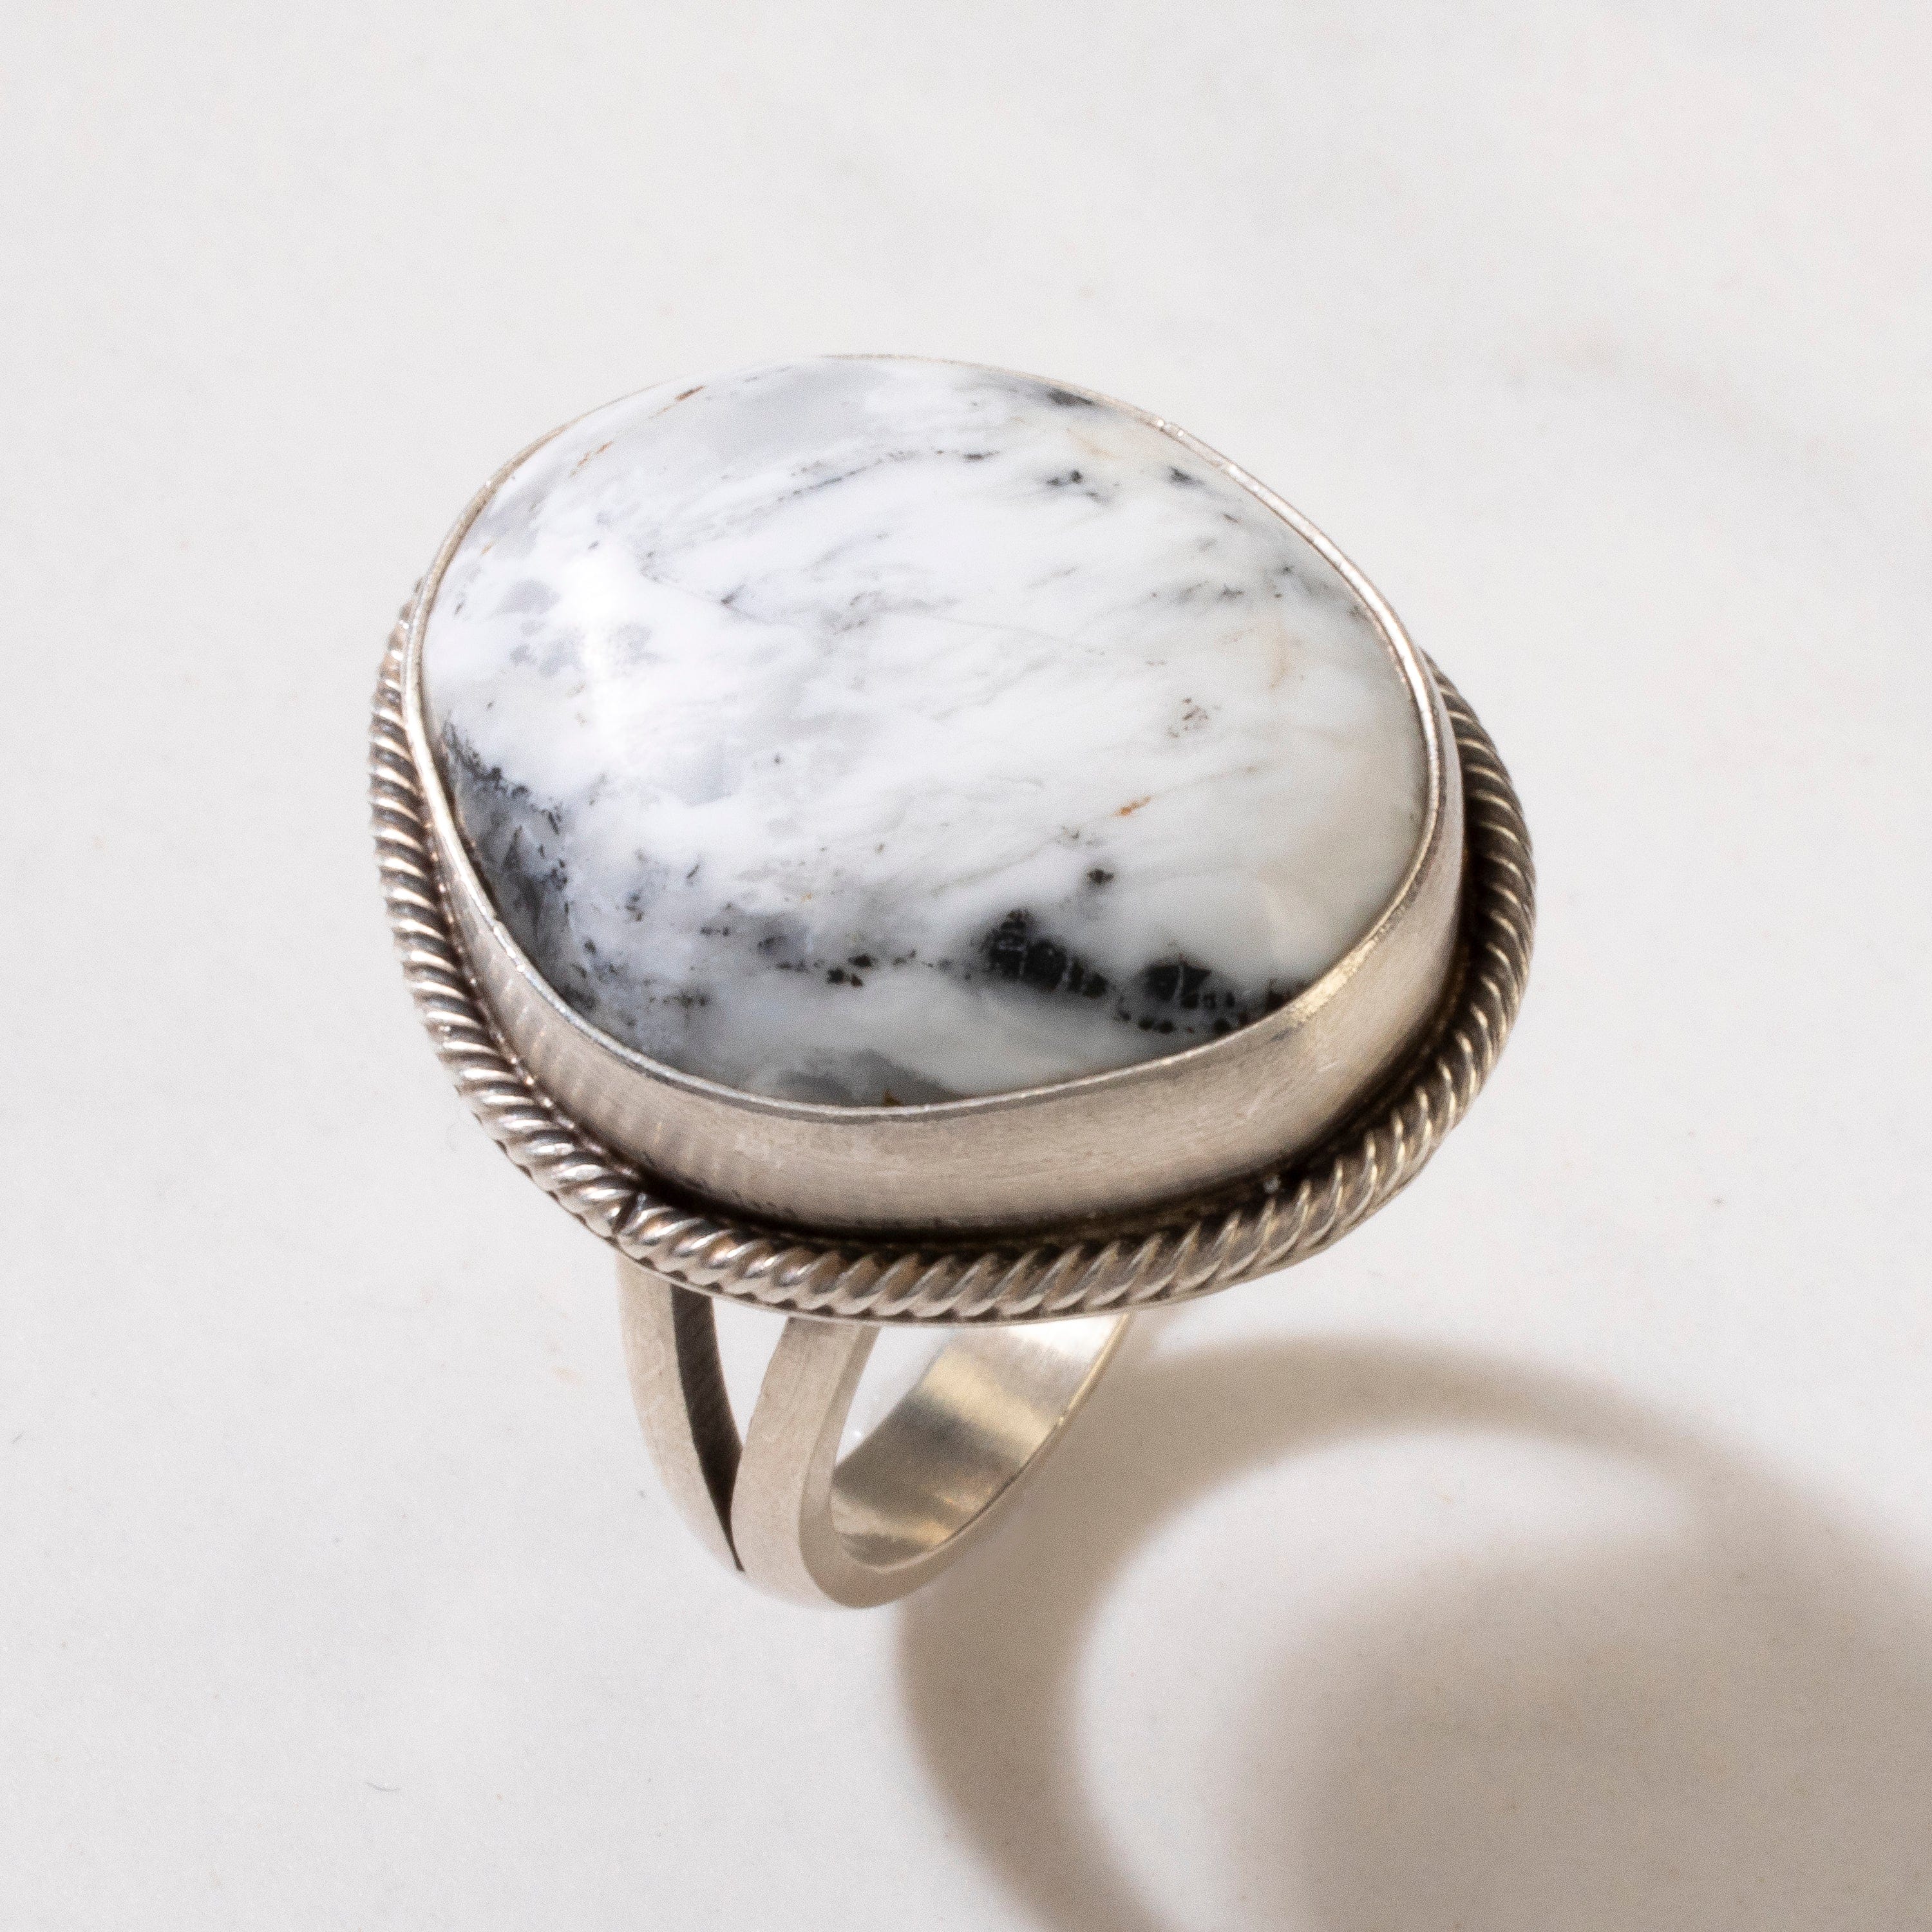 Kalifano Native American Jewelry 6 Scott Skeets White Buffalo Turquoise Round Navajo USA Native American Made 925 Sterling Silver Ring NAR500.083.6